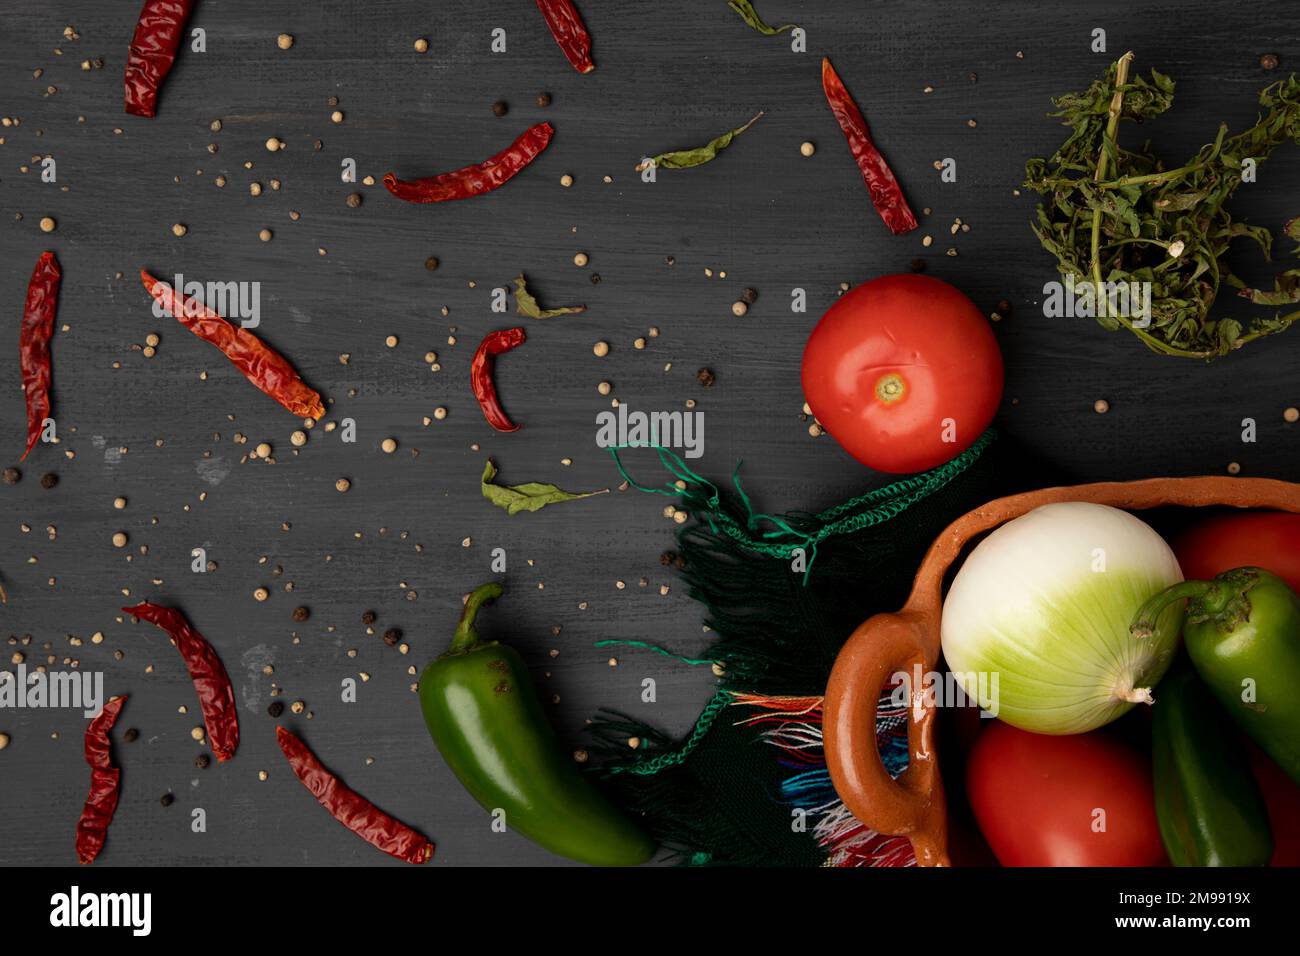 Background of ingredients to make a sauce, such as tomato, onion and chili peppers Stock Photo